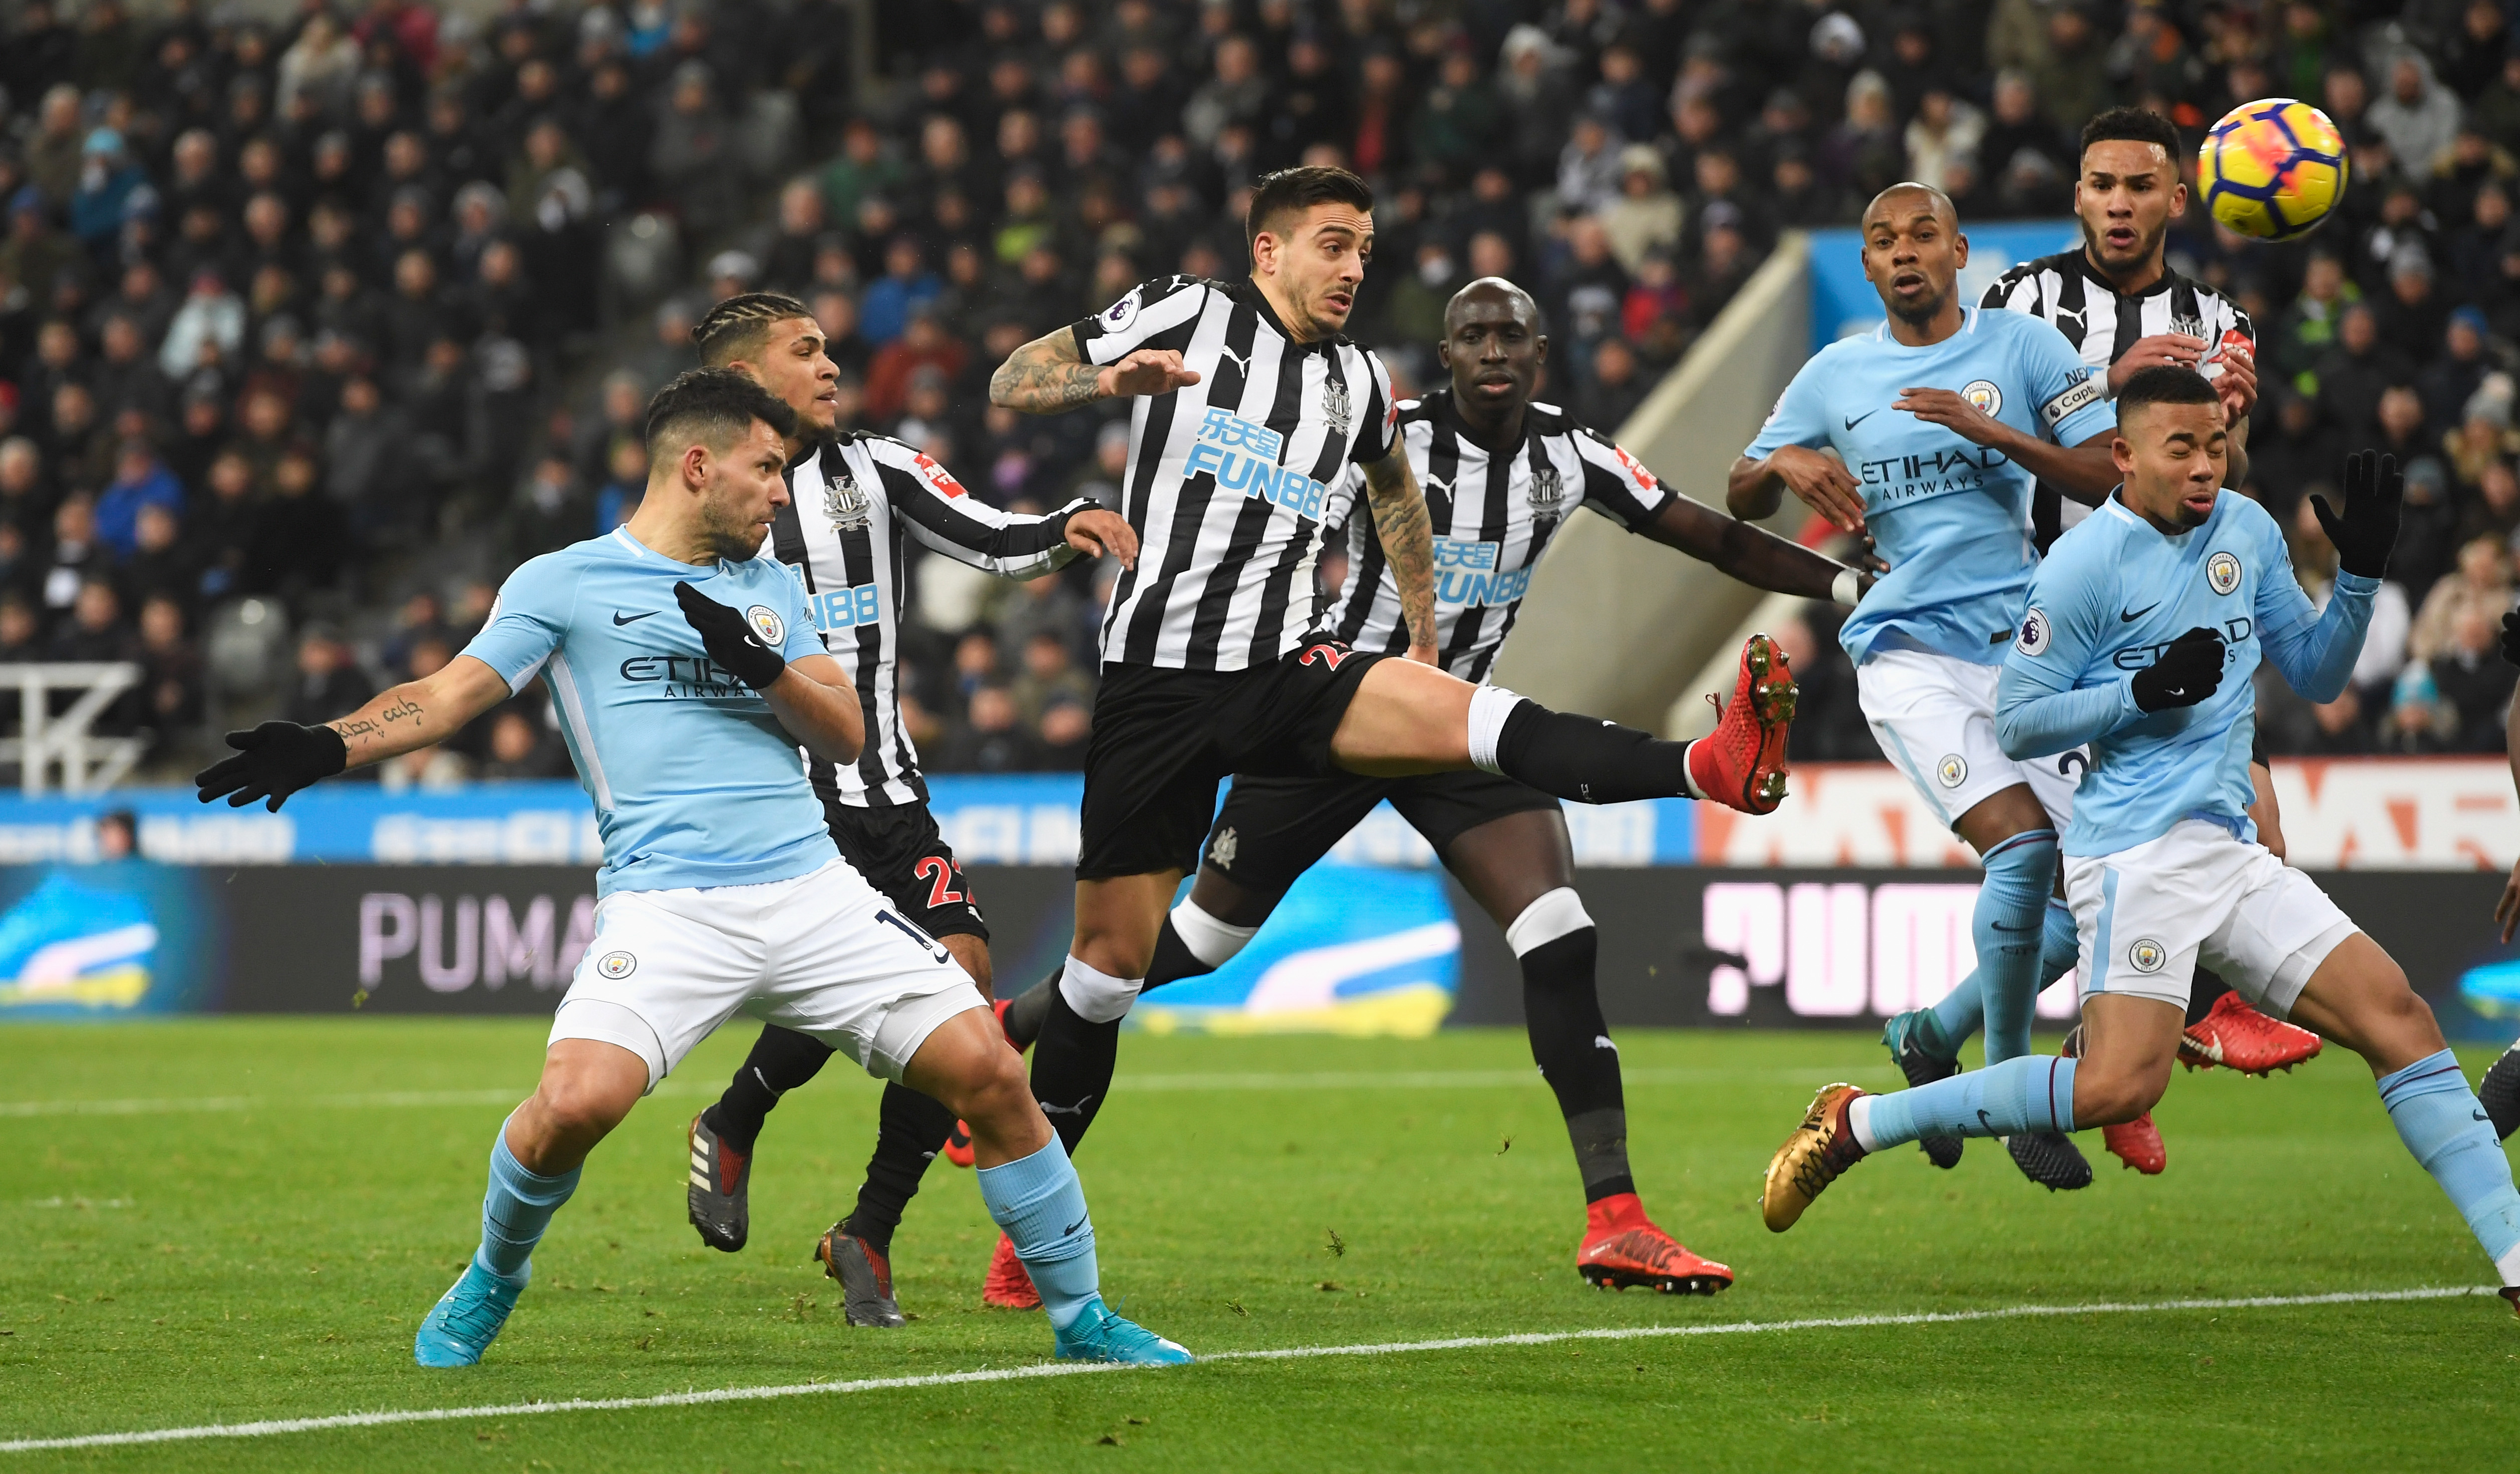 NEWCASTLE UPON TYNE, ENGLAND - DECEMBER 27:  Sergio Aguero of Manchester City heads wide during the Premier League match between Newcastle United and Manchester City at St. James' Park on December 27, 2017 in Newcastle upon Tyne, England.  (Photo by Stu Forster/Getty Images)